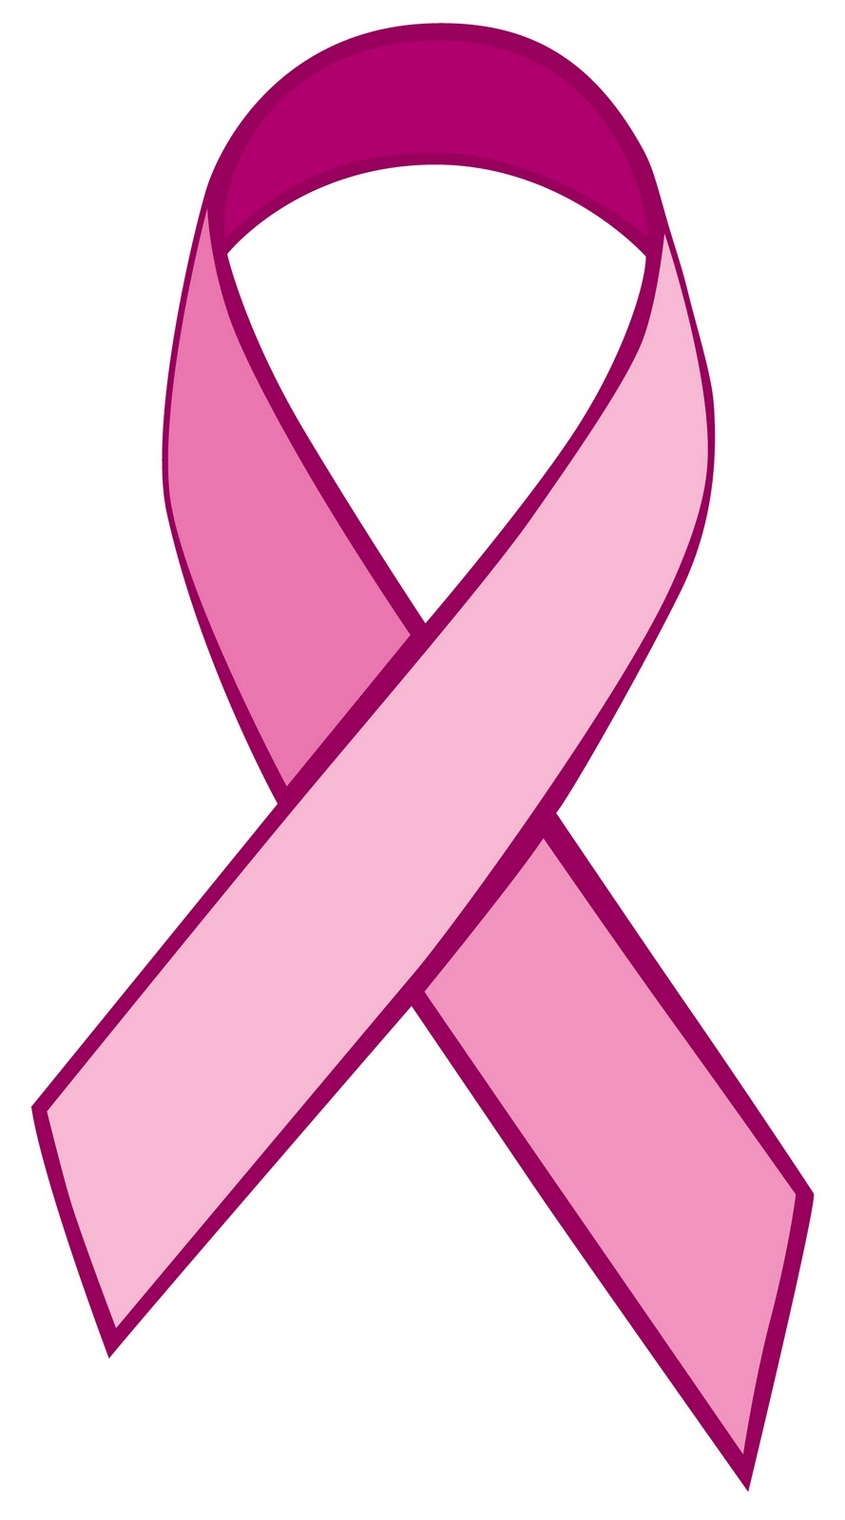 Breast Cancer Ribbon Clip Art Free Clipart - Free to use Clip Art ...